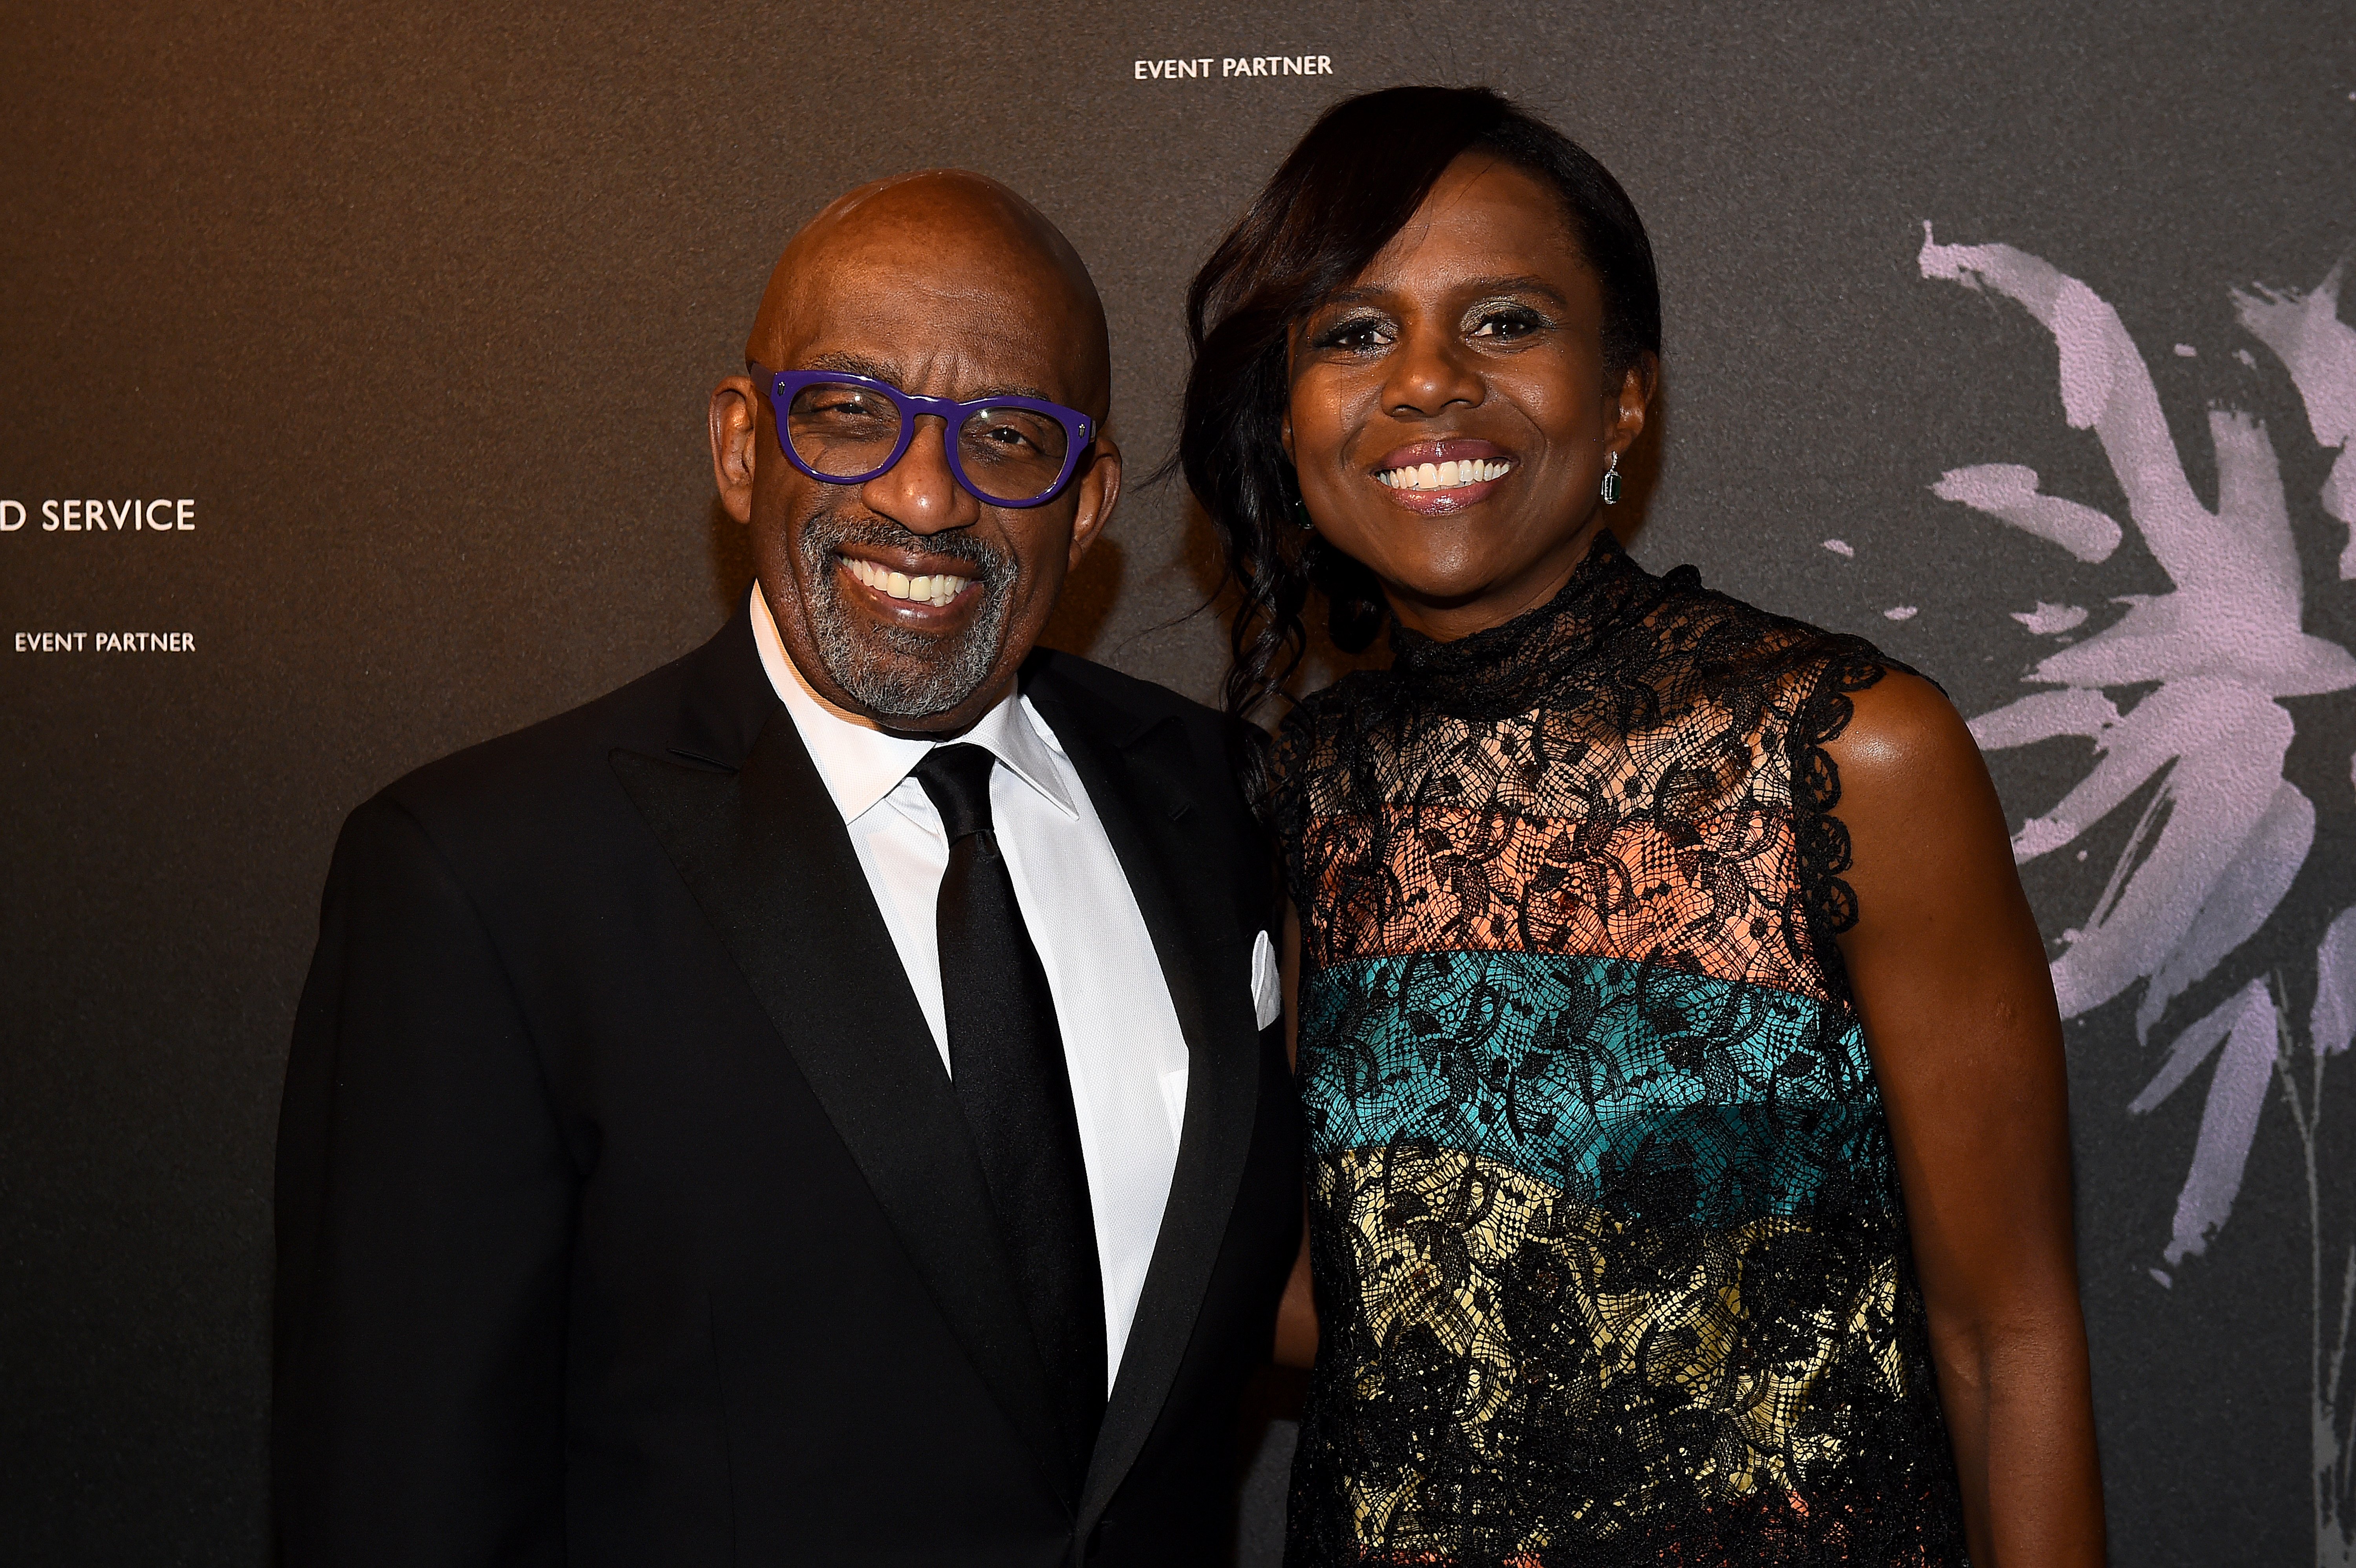 Al Roker and Deborah Roberts at the Fourth Annual Berggruen Prize Gala in New York City on December 16, 2019 | Source: Getty Images